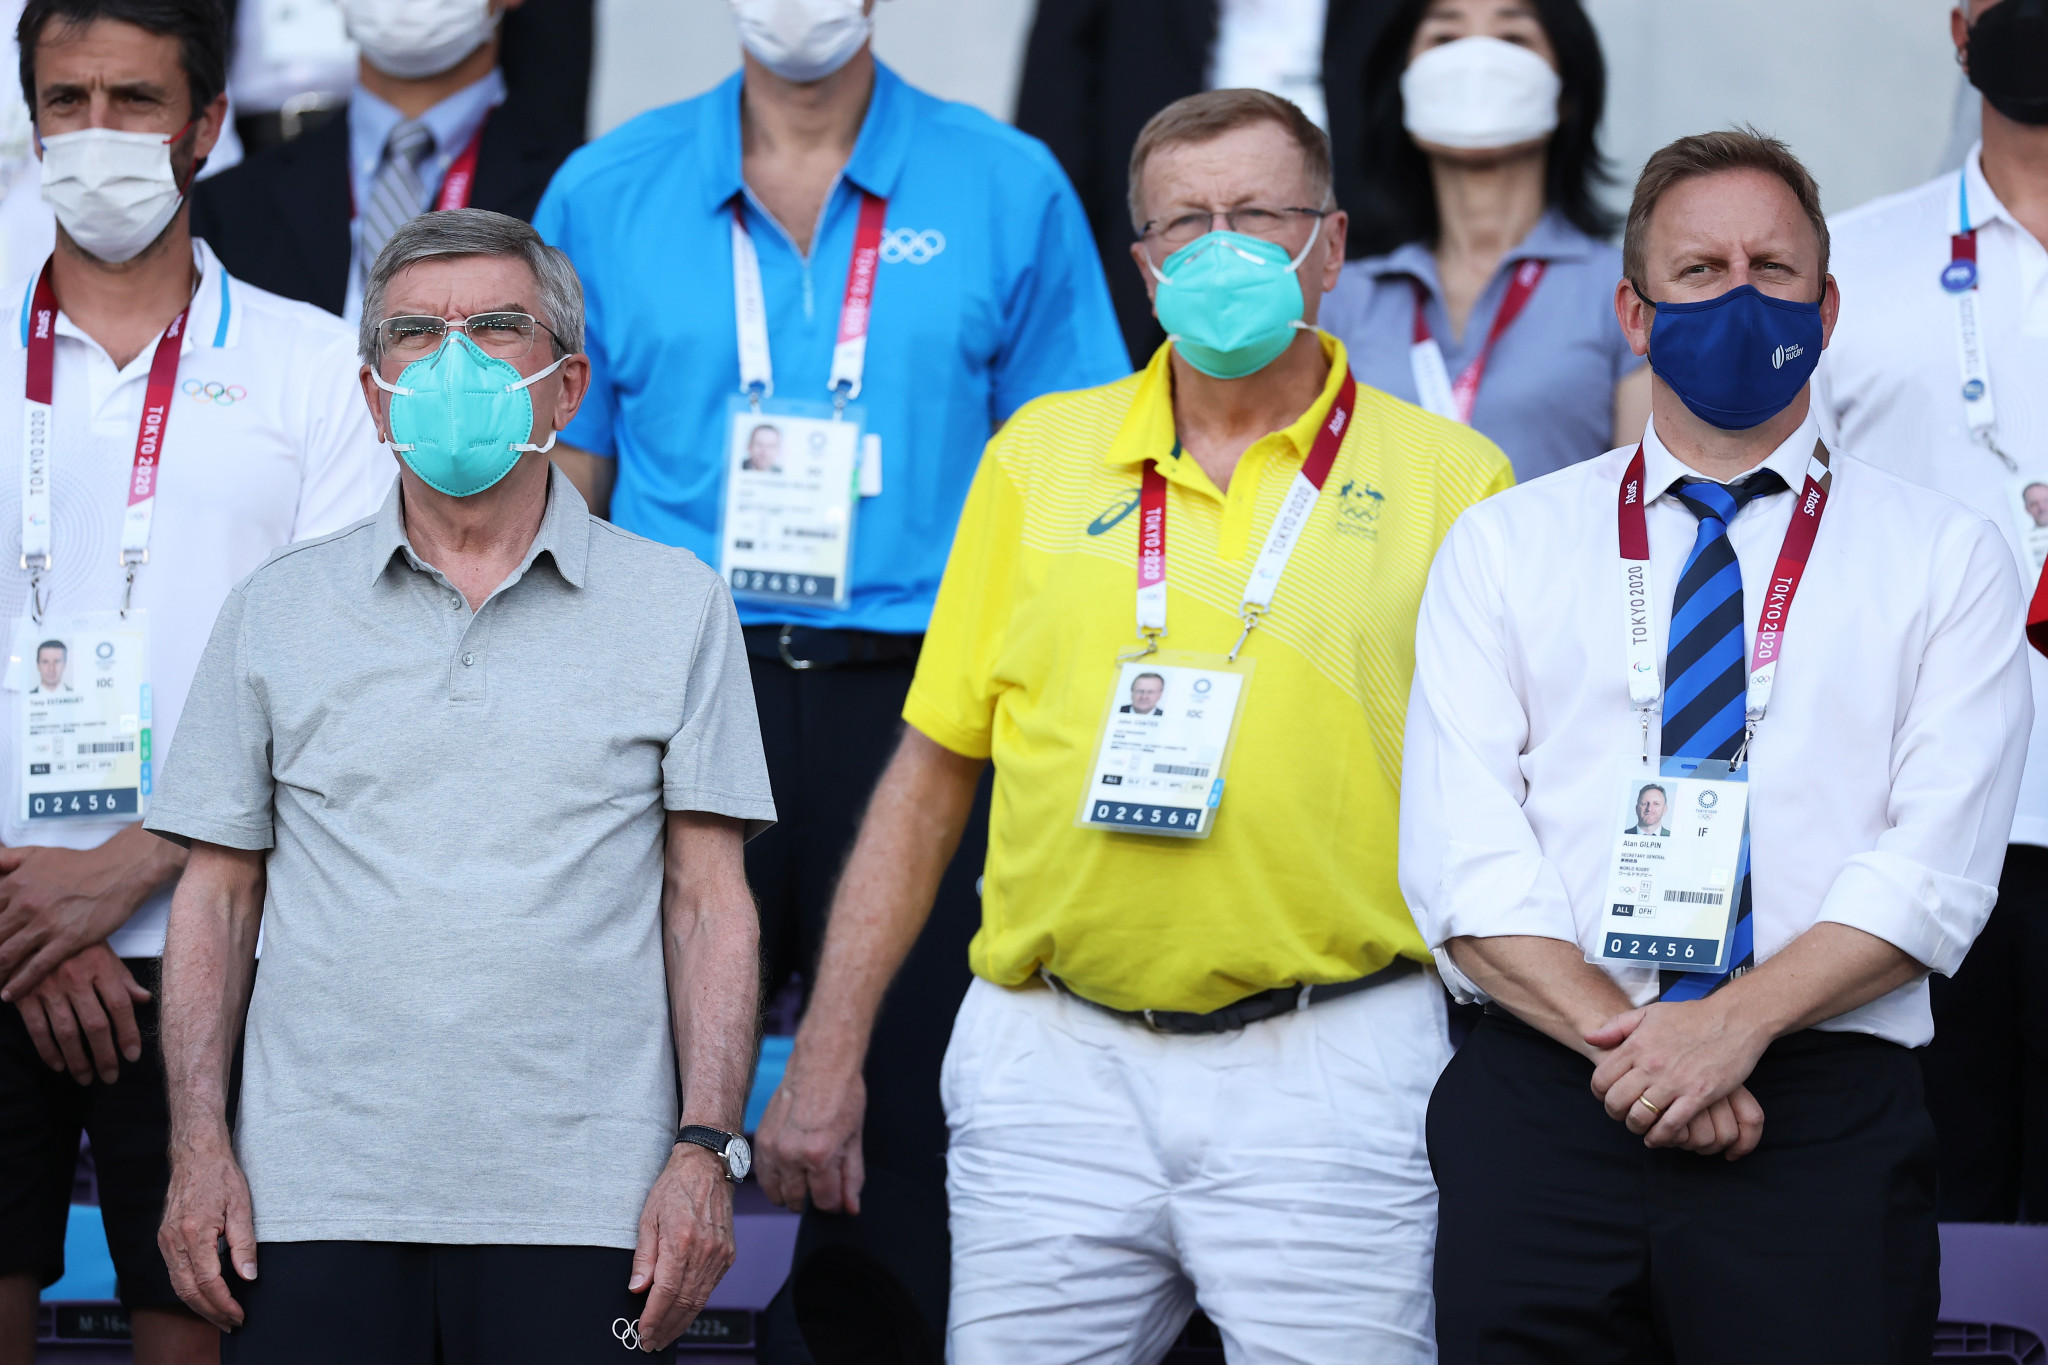 IOC President Thomas Bach and IOC vice-president John Coates watch the rugby sevens action alongside World Rugby chief executive Alan Gilpin at Tokyo 2020 ©Getty Images